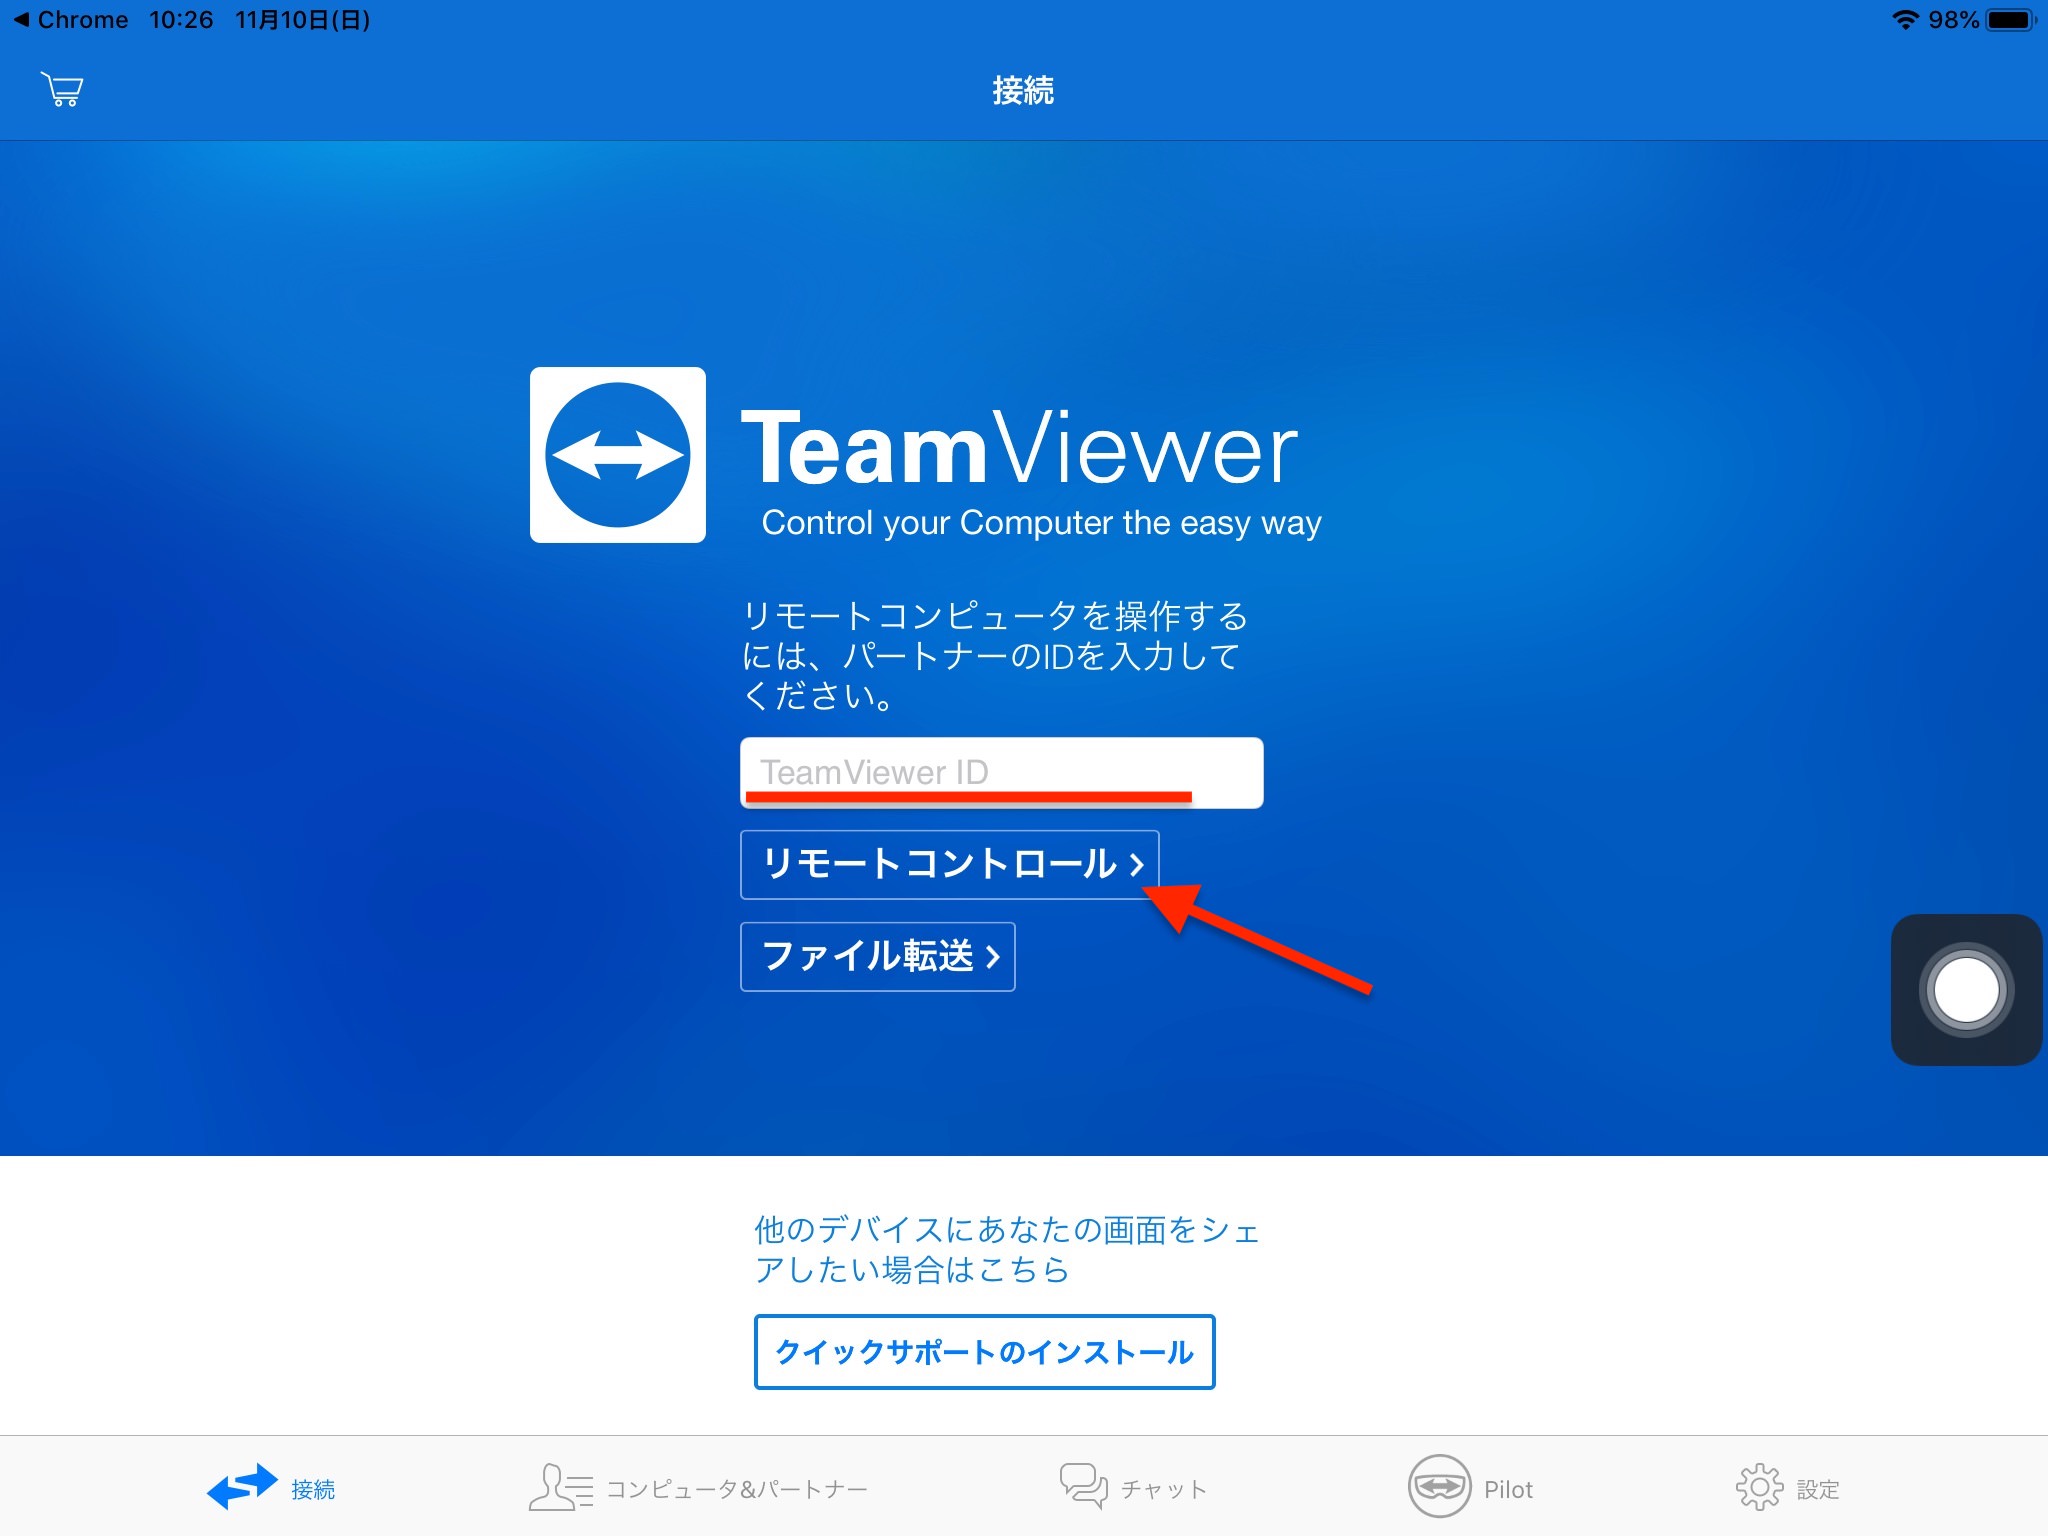 how to use teamviewer on ipad id